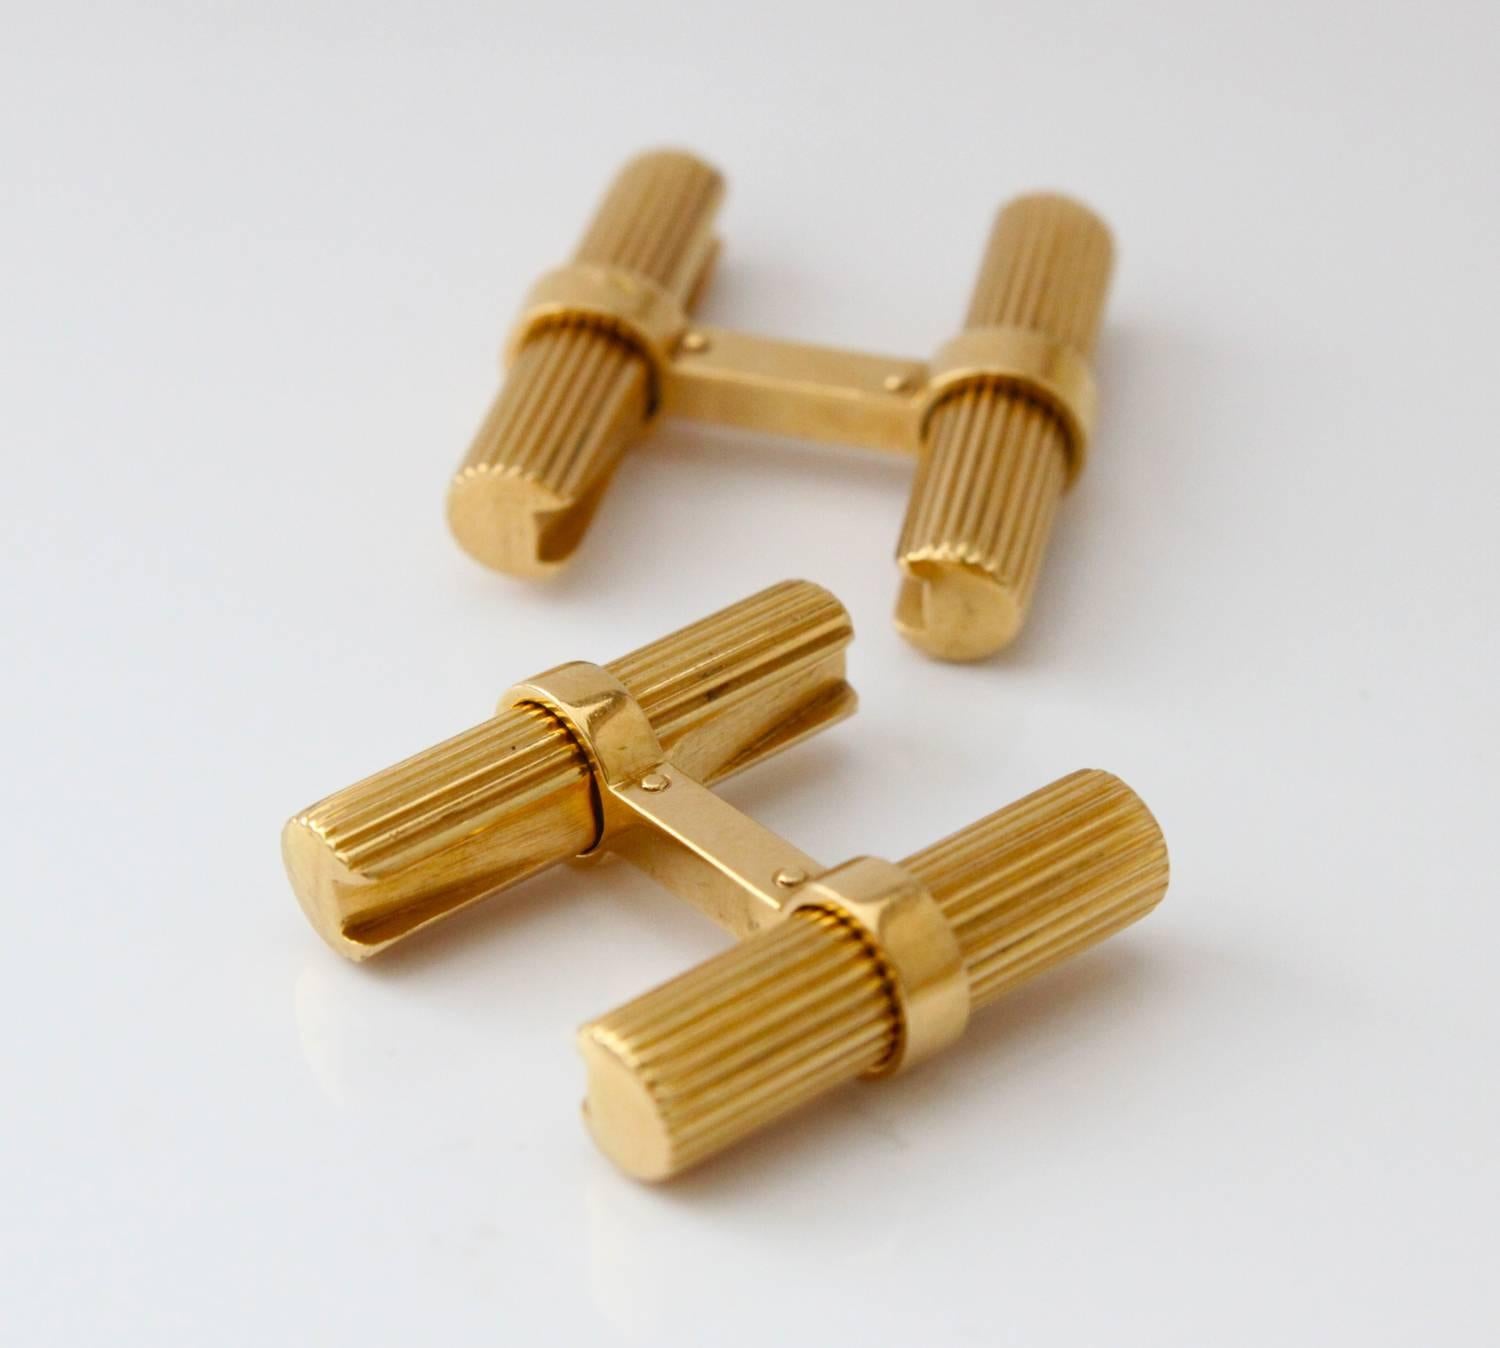 These very popular cufflinks in 18k yellow gold are timeless beautiful and very easy to wear. The gold sticks slide out with a simple twist. They can also be interchanged with other sticks that are made out of differently coloured gemstones or metal